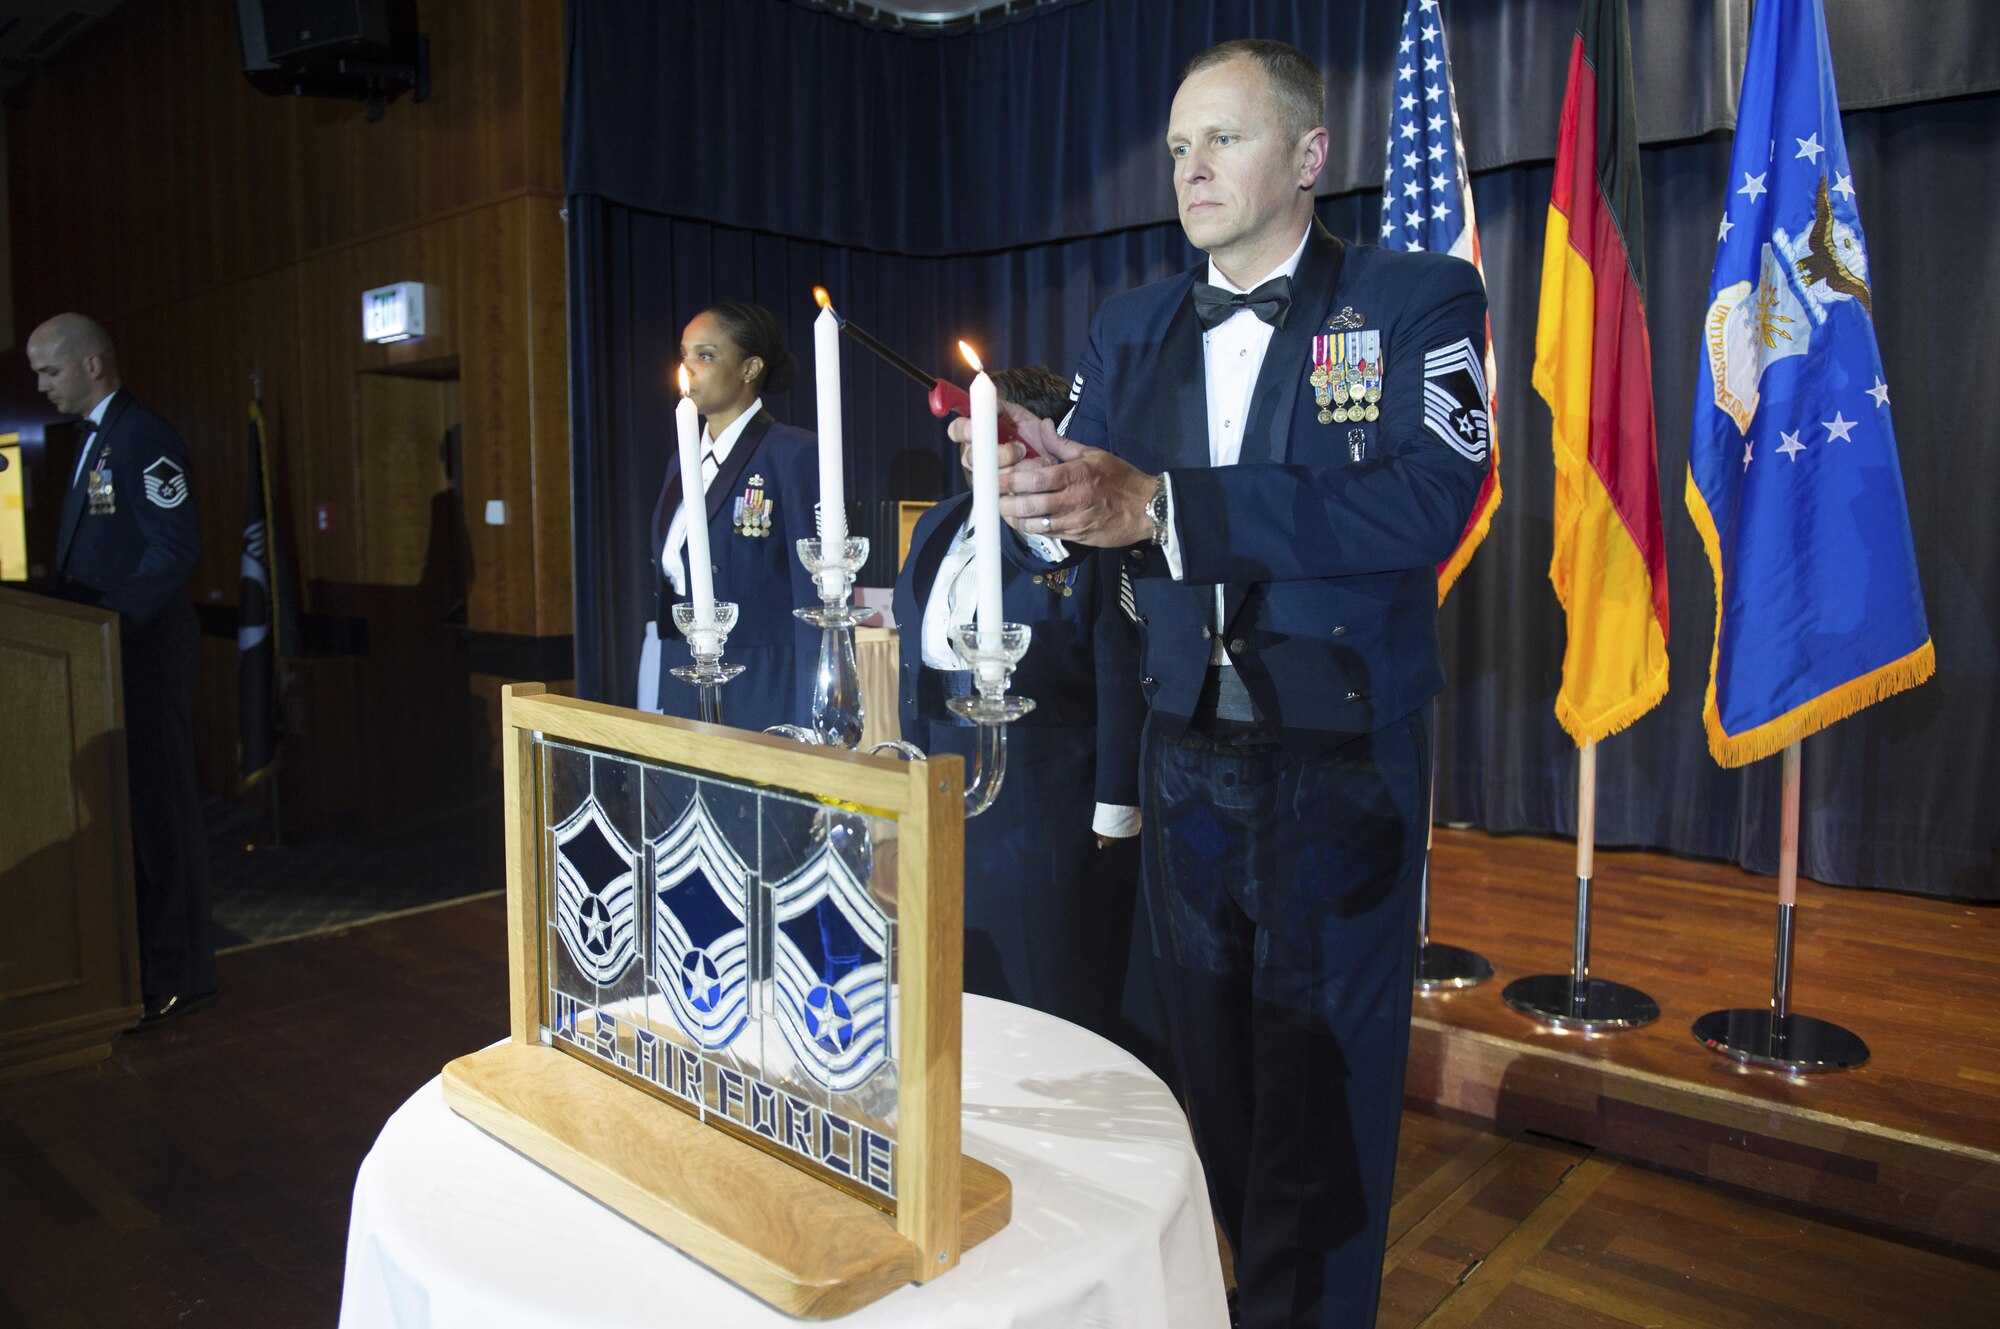 U.S. Air Force Chief Master Sgt. Scott Chord, 702nd Munitions Support Squadron chief enlisted manager, center right, lights a candle during a senior NCO induction ceremony at Club Eifel on Spangdahlem Air Base, Germany, Aug. 12, 2016. Senior NCOs lit corresponding candles symbolizing the achievement into the top tier enlisted ranks. (U.S. Air Force photo by Airman 1st Class Preston Cherry/Released)